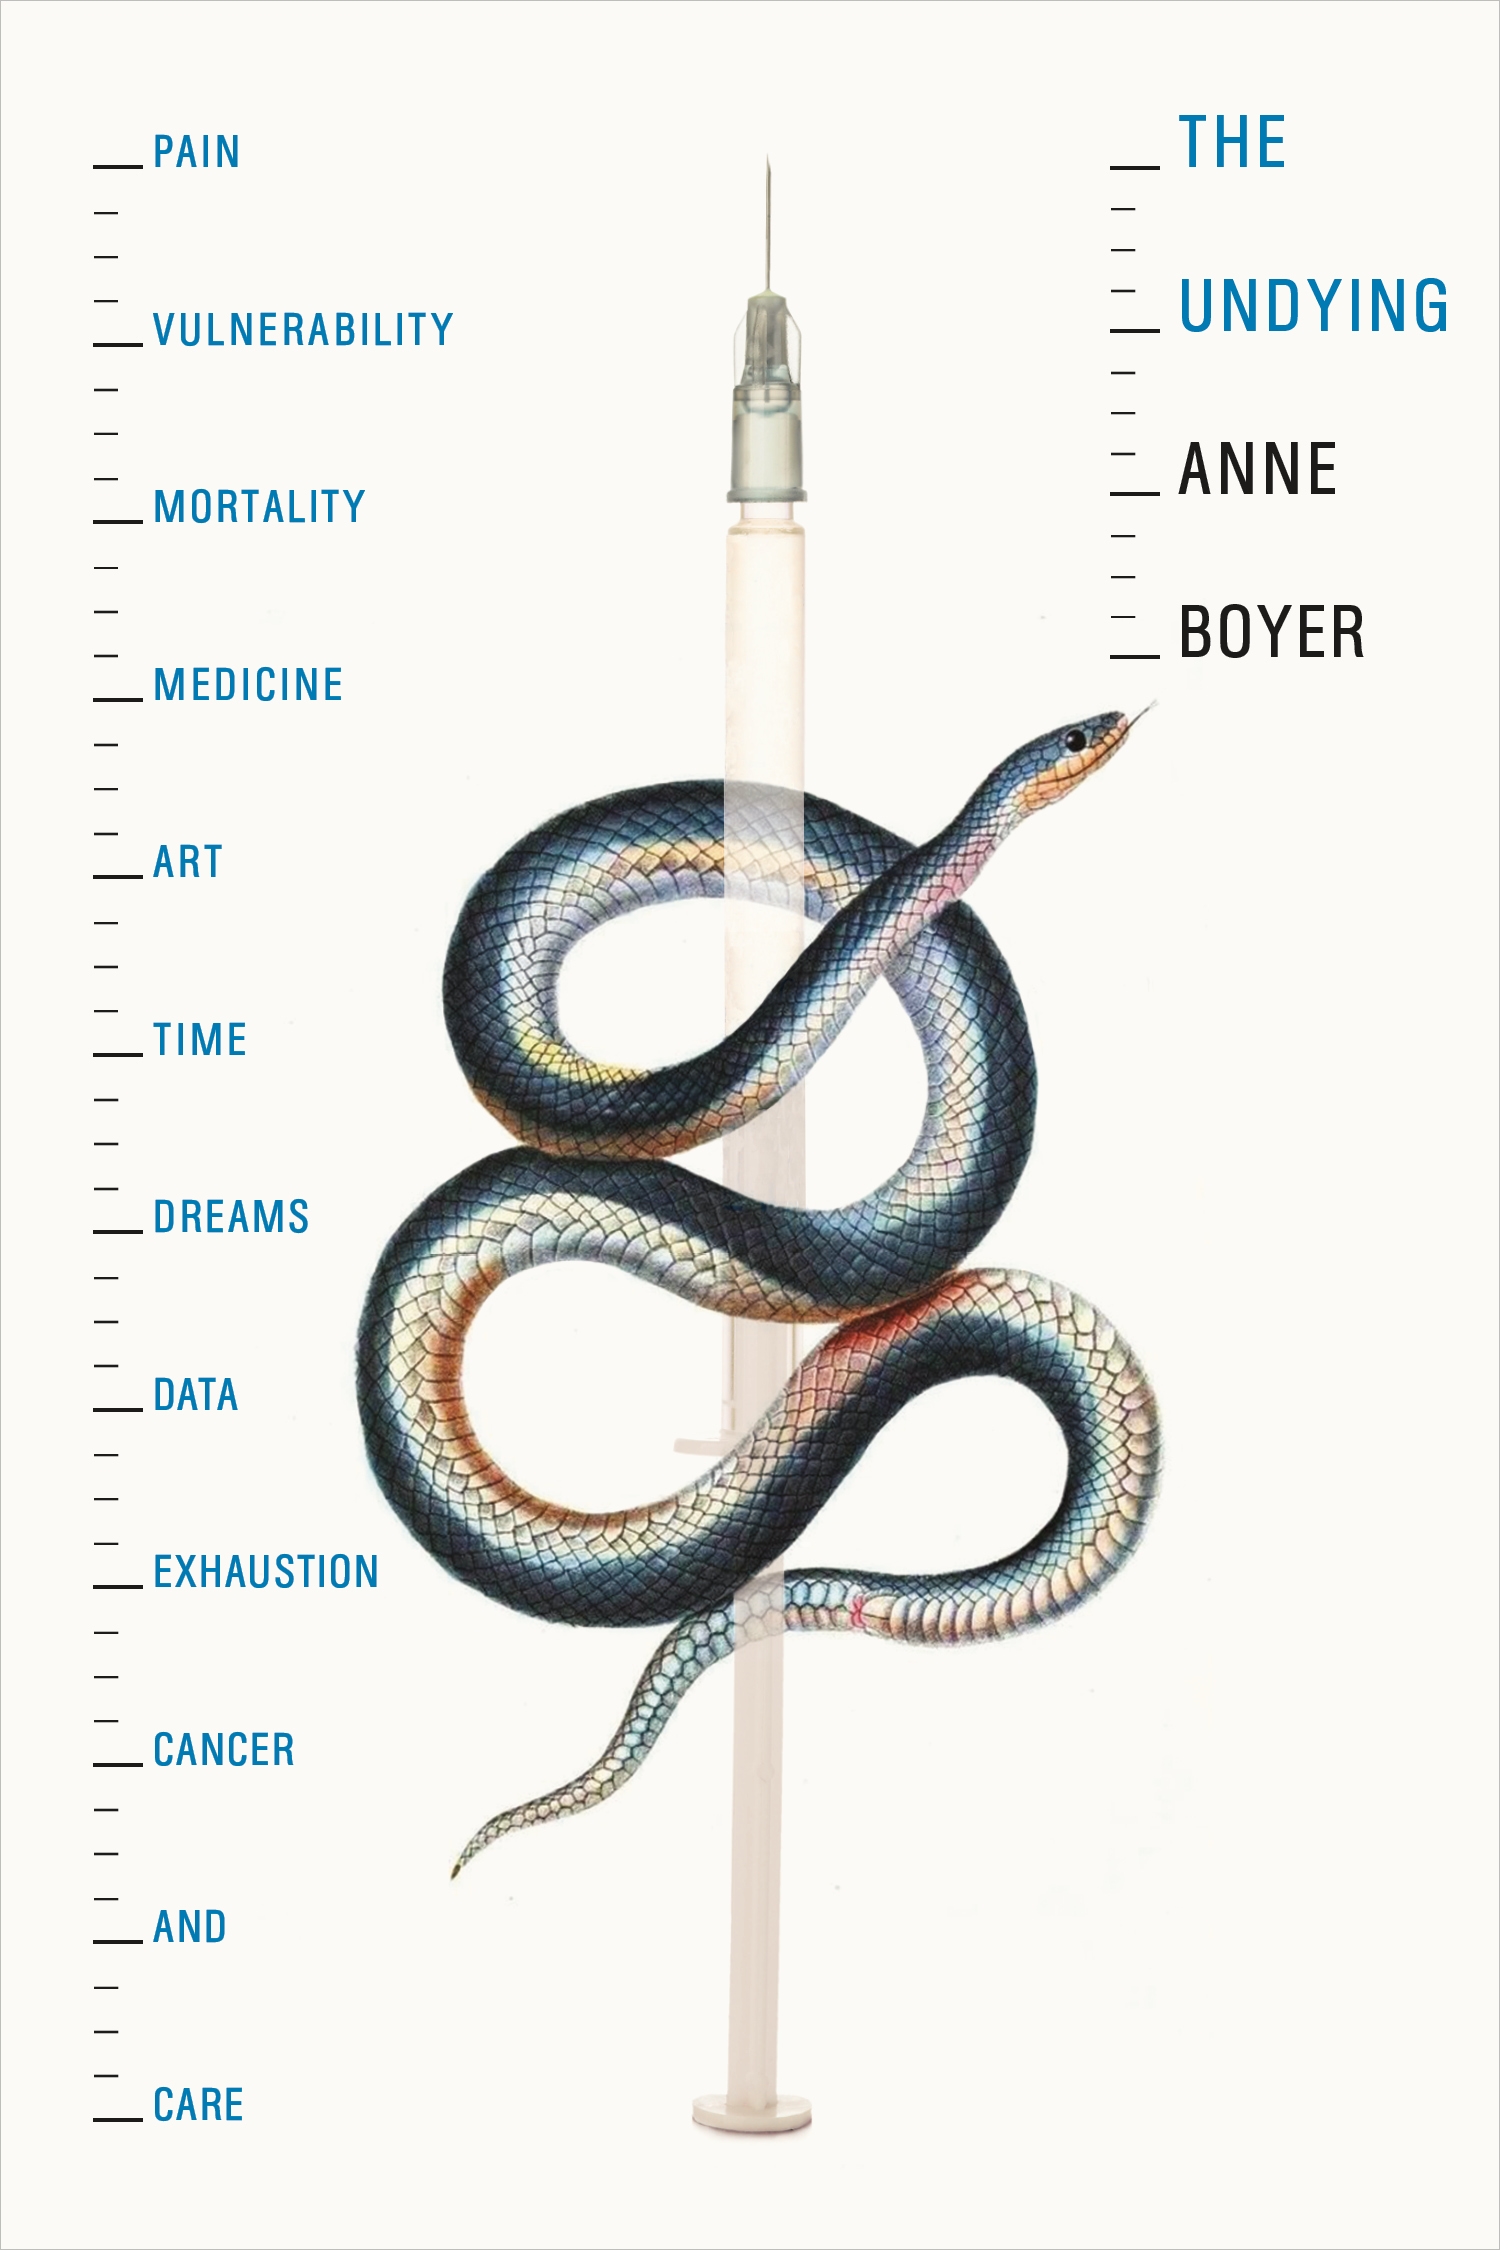 Book “The Undying” by Anne Boyer — September 17, 2019